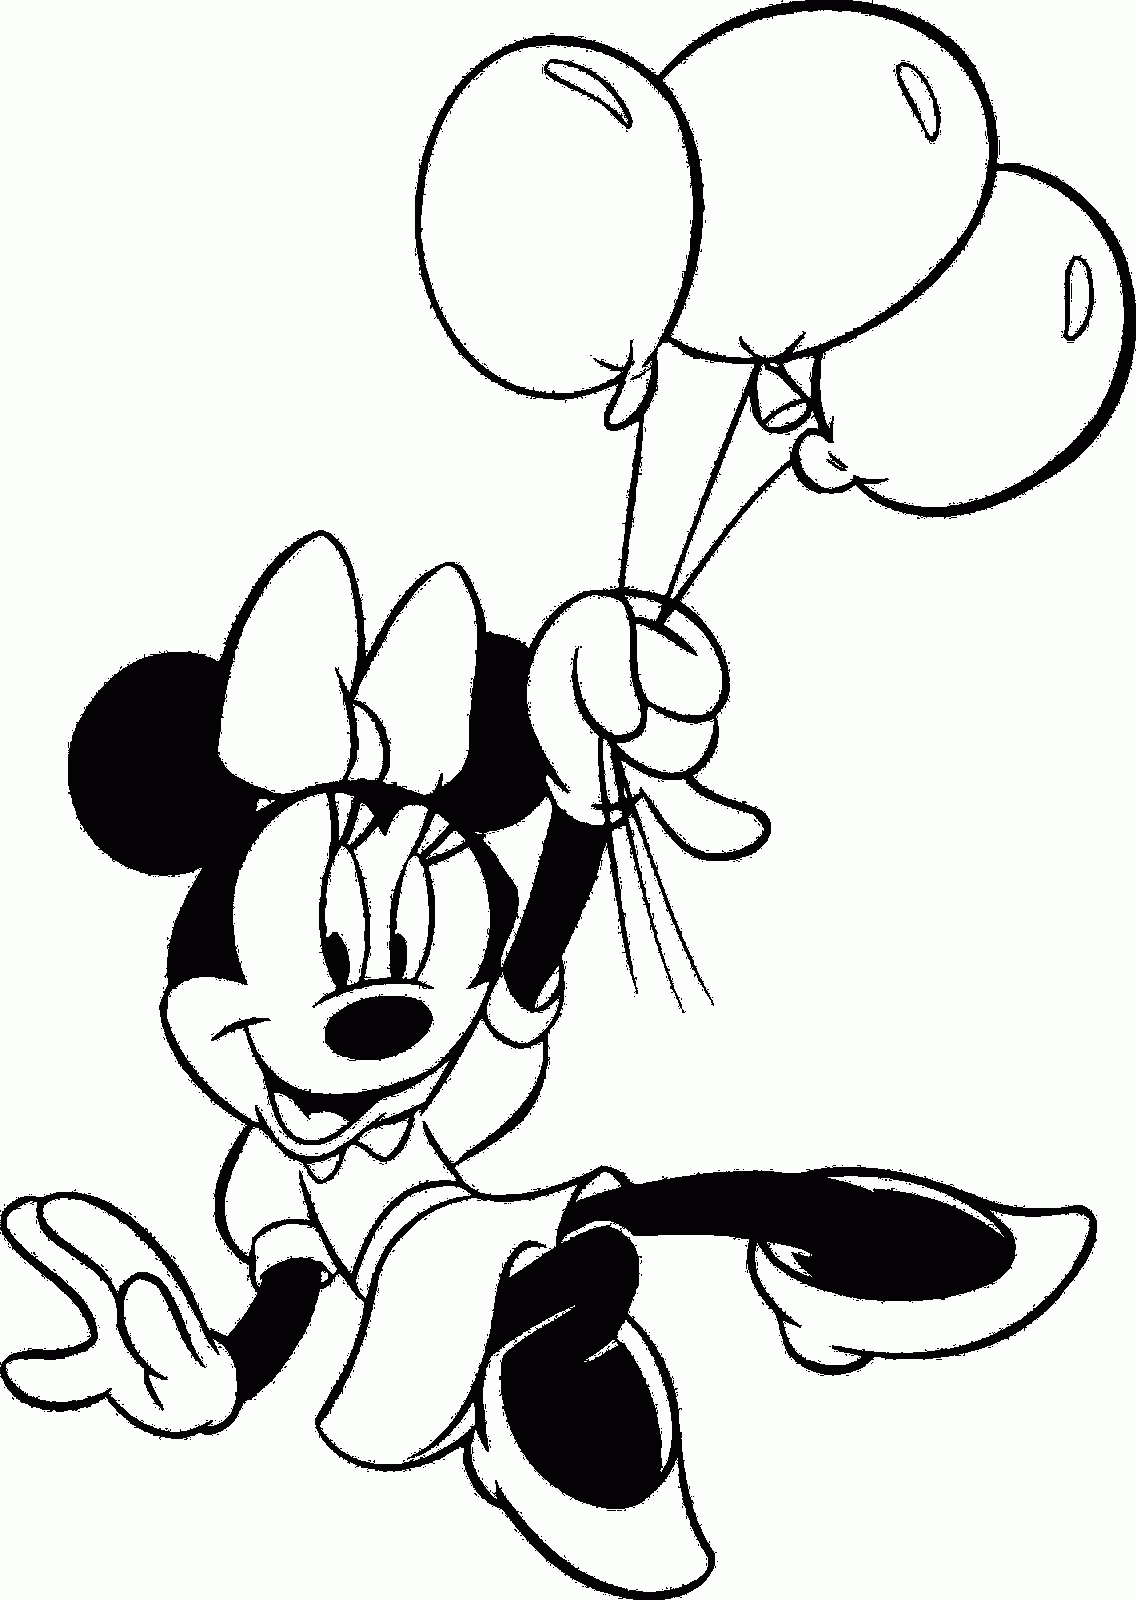 Minnie Holding Balloons Coloring Pages For Kids #eDl : Printable ...